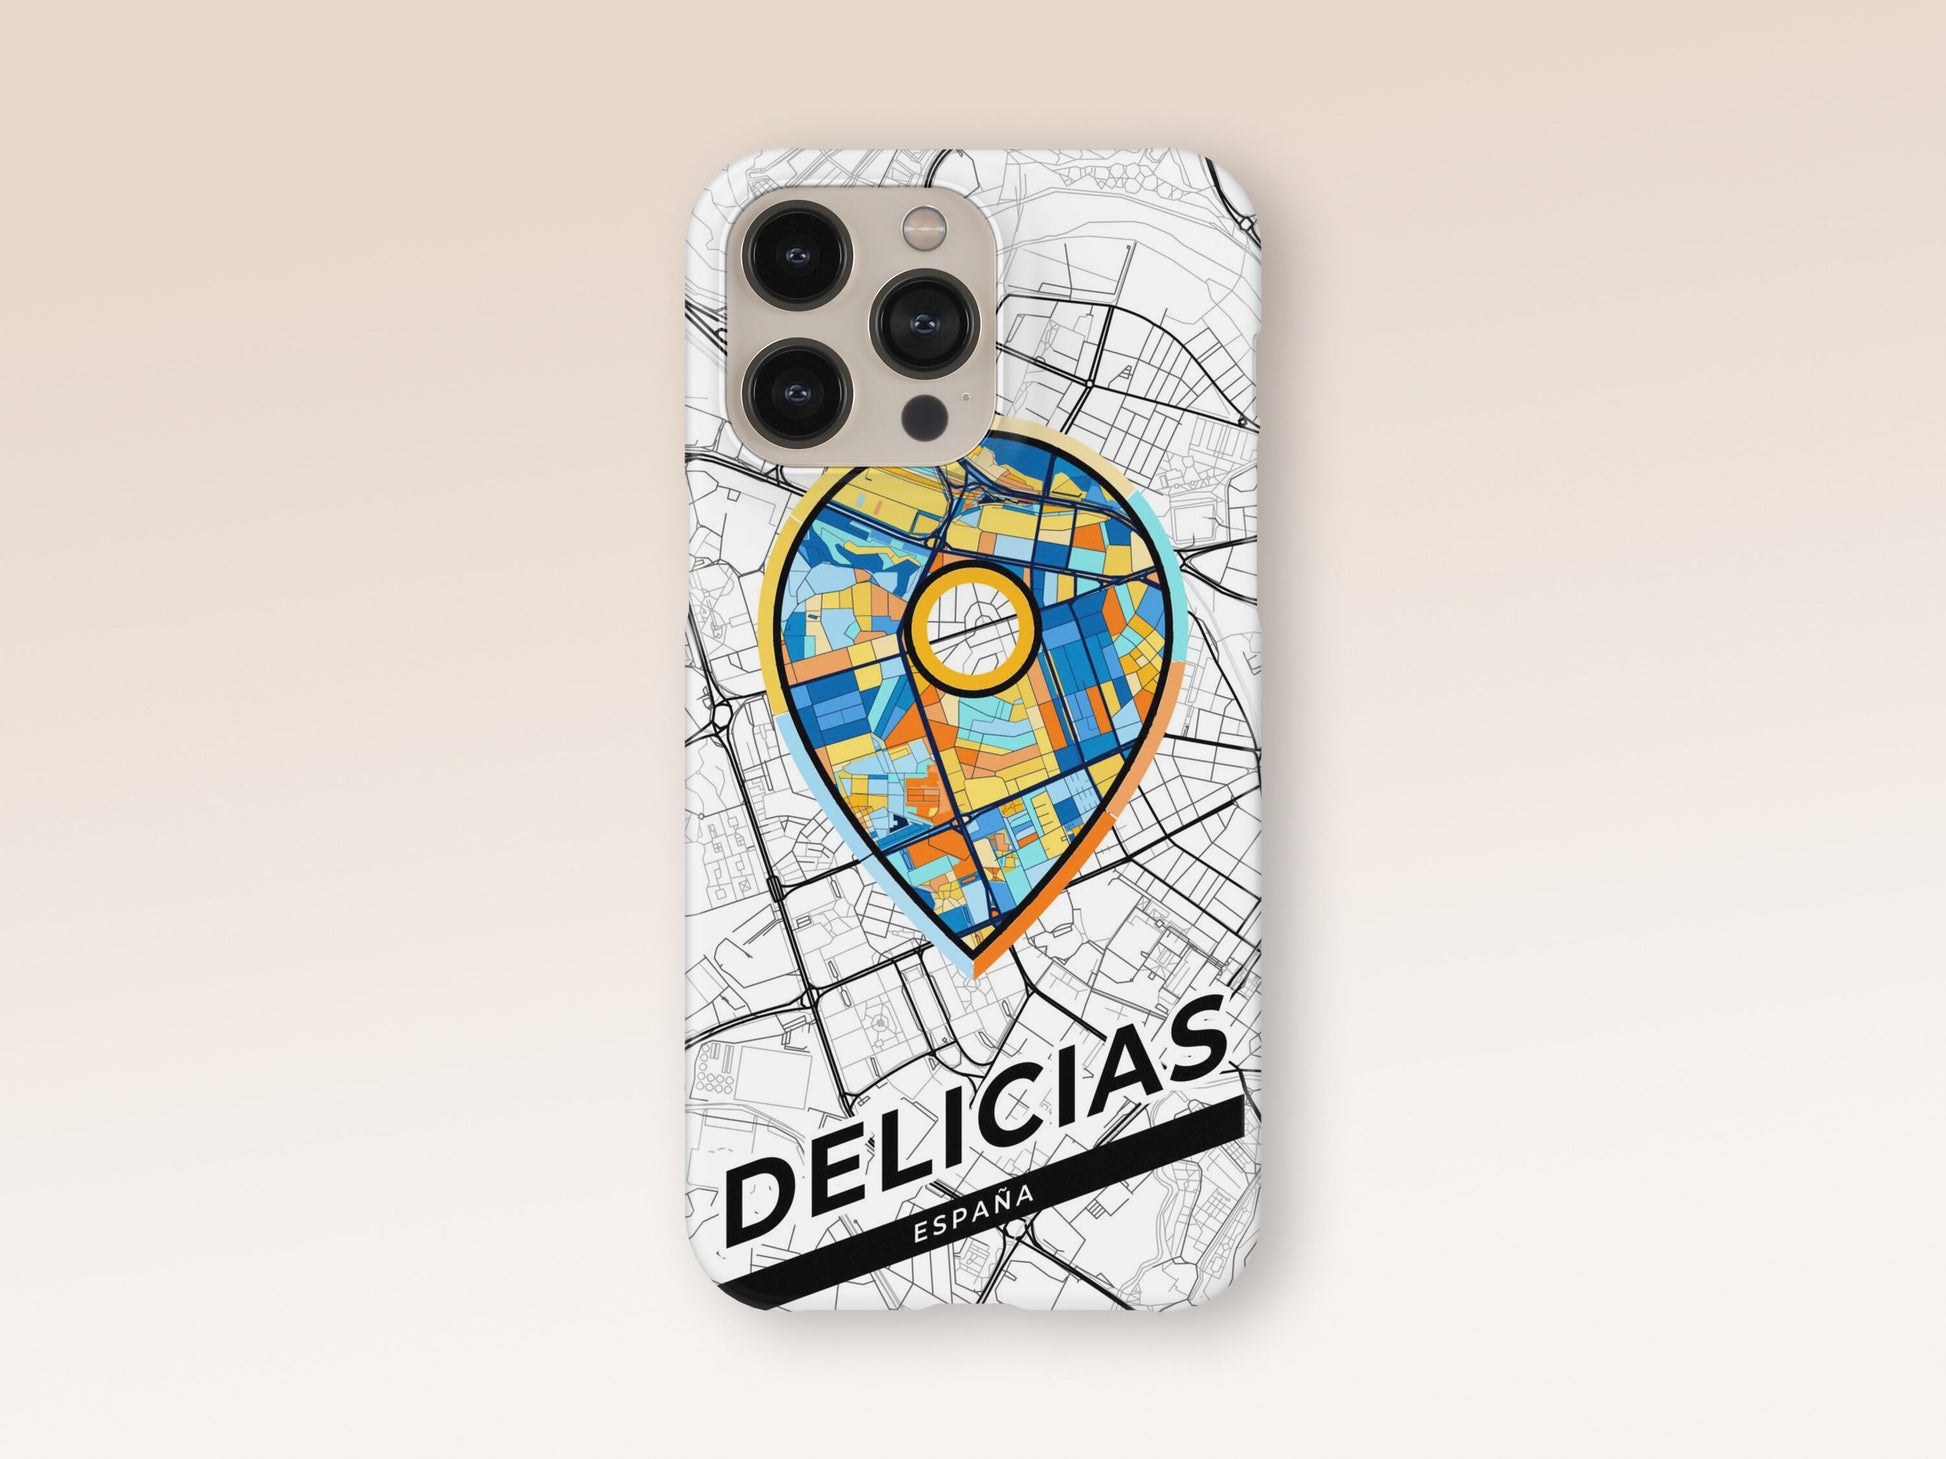 Delicias Spain slim phone case with colorful icon. Birthday, wedding or housewarming gift. Couple match cases. 1